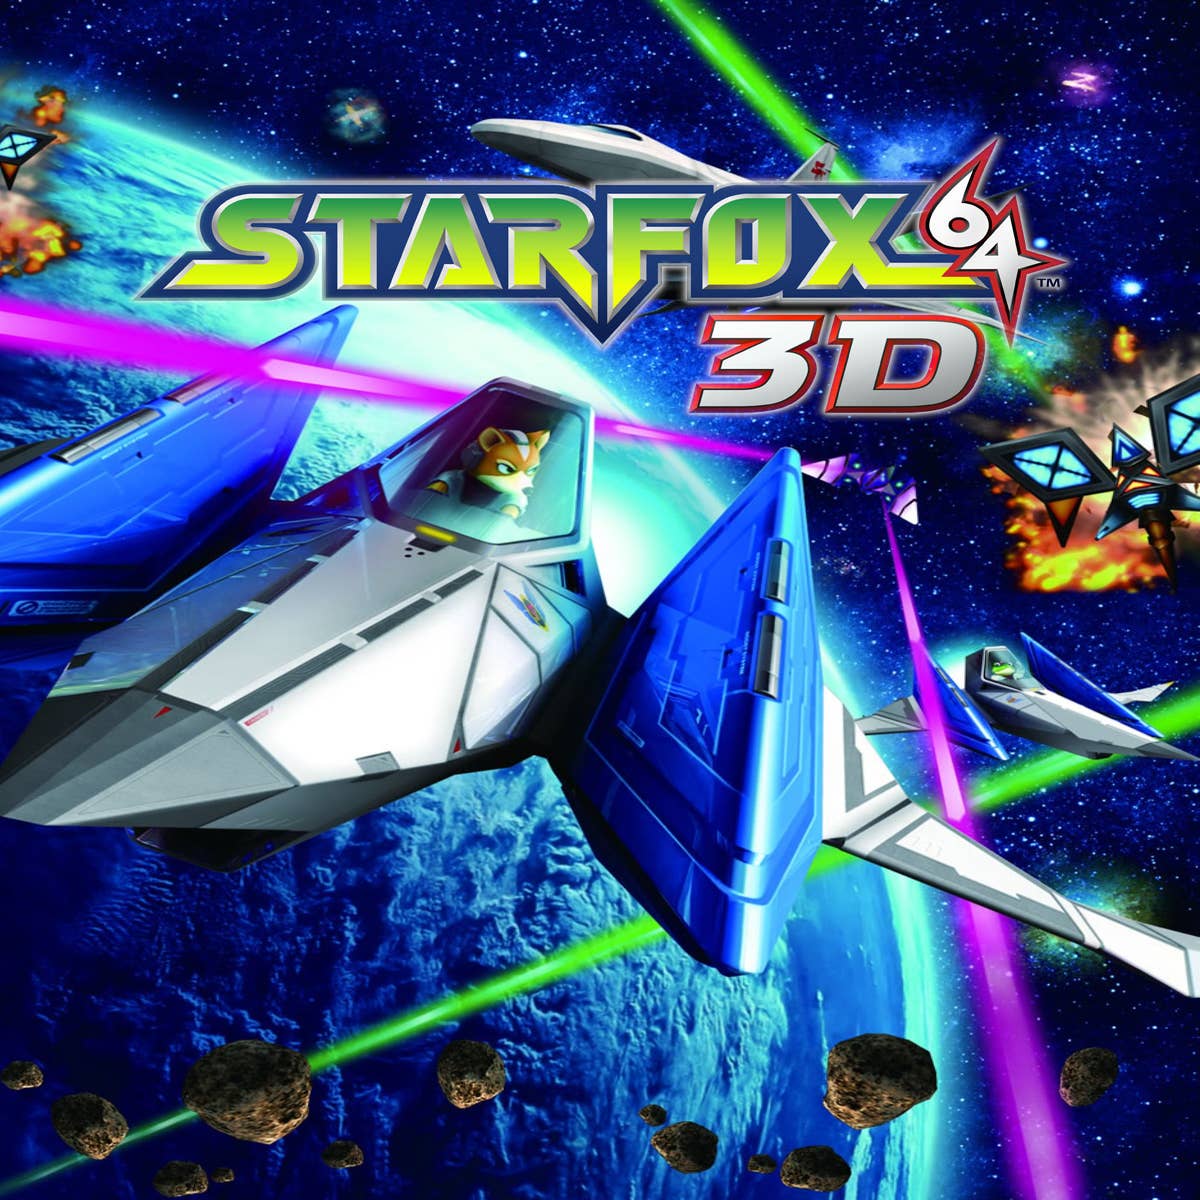 Review: Star Fox 64 3D offers 17 awesome levels for DS owners